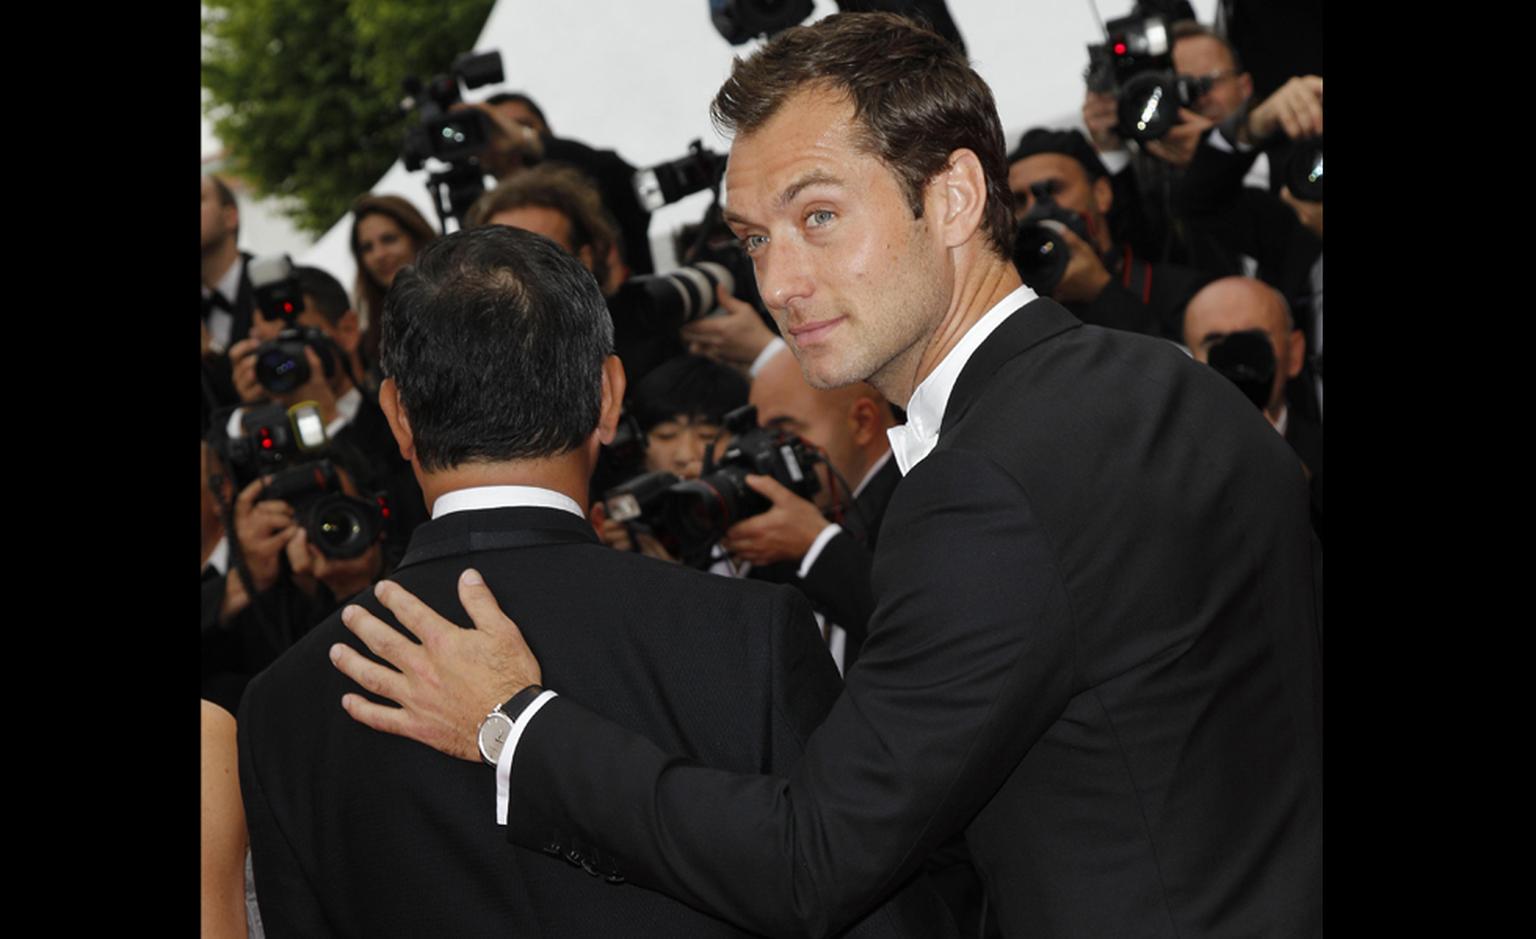 Jude Law with LUC Chopard XPS white gold watch at Cannes Film Festival 2011